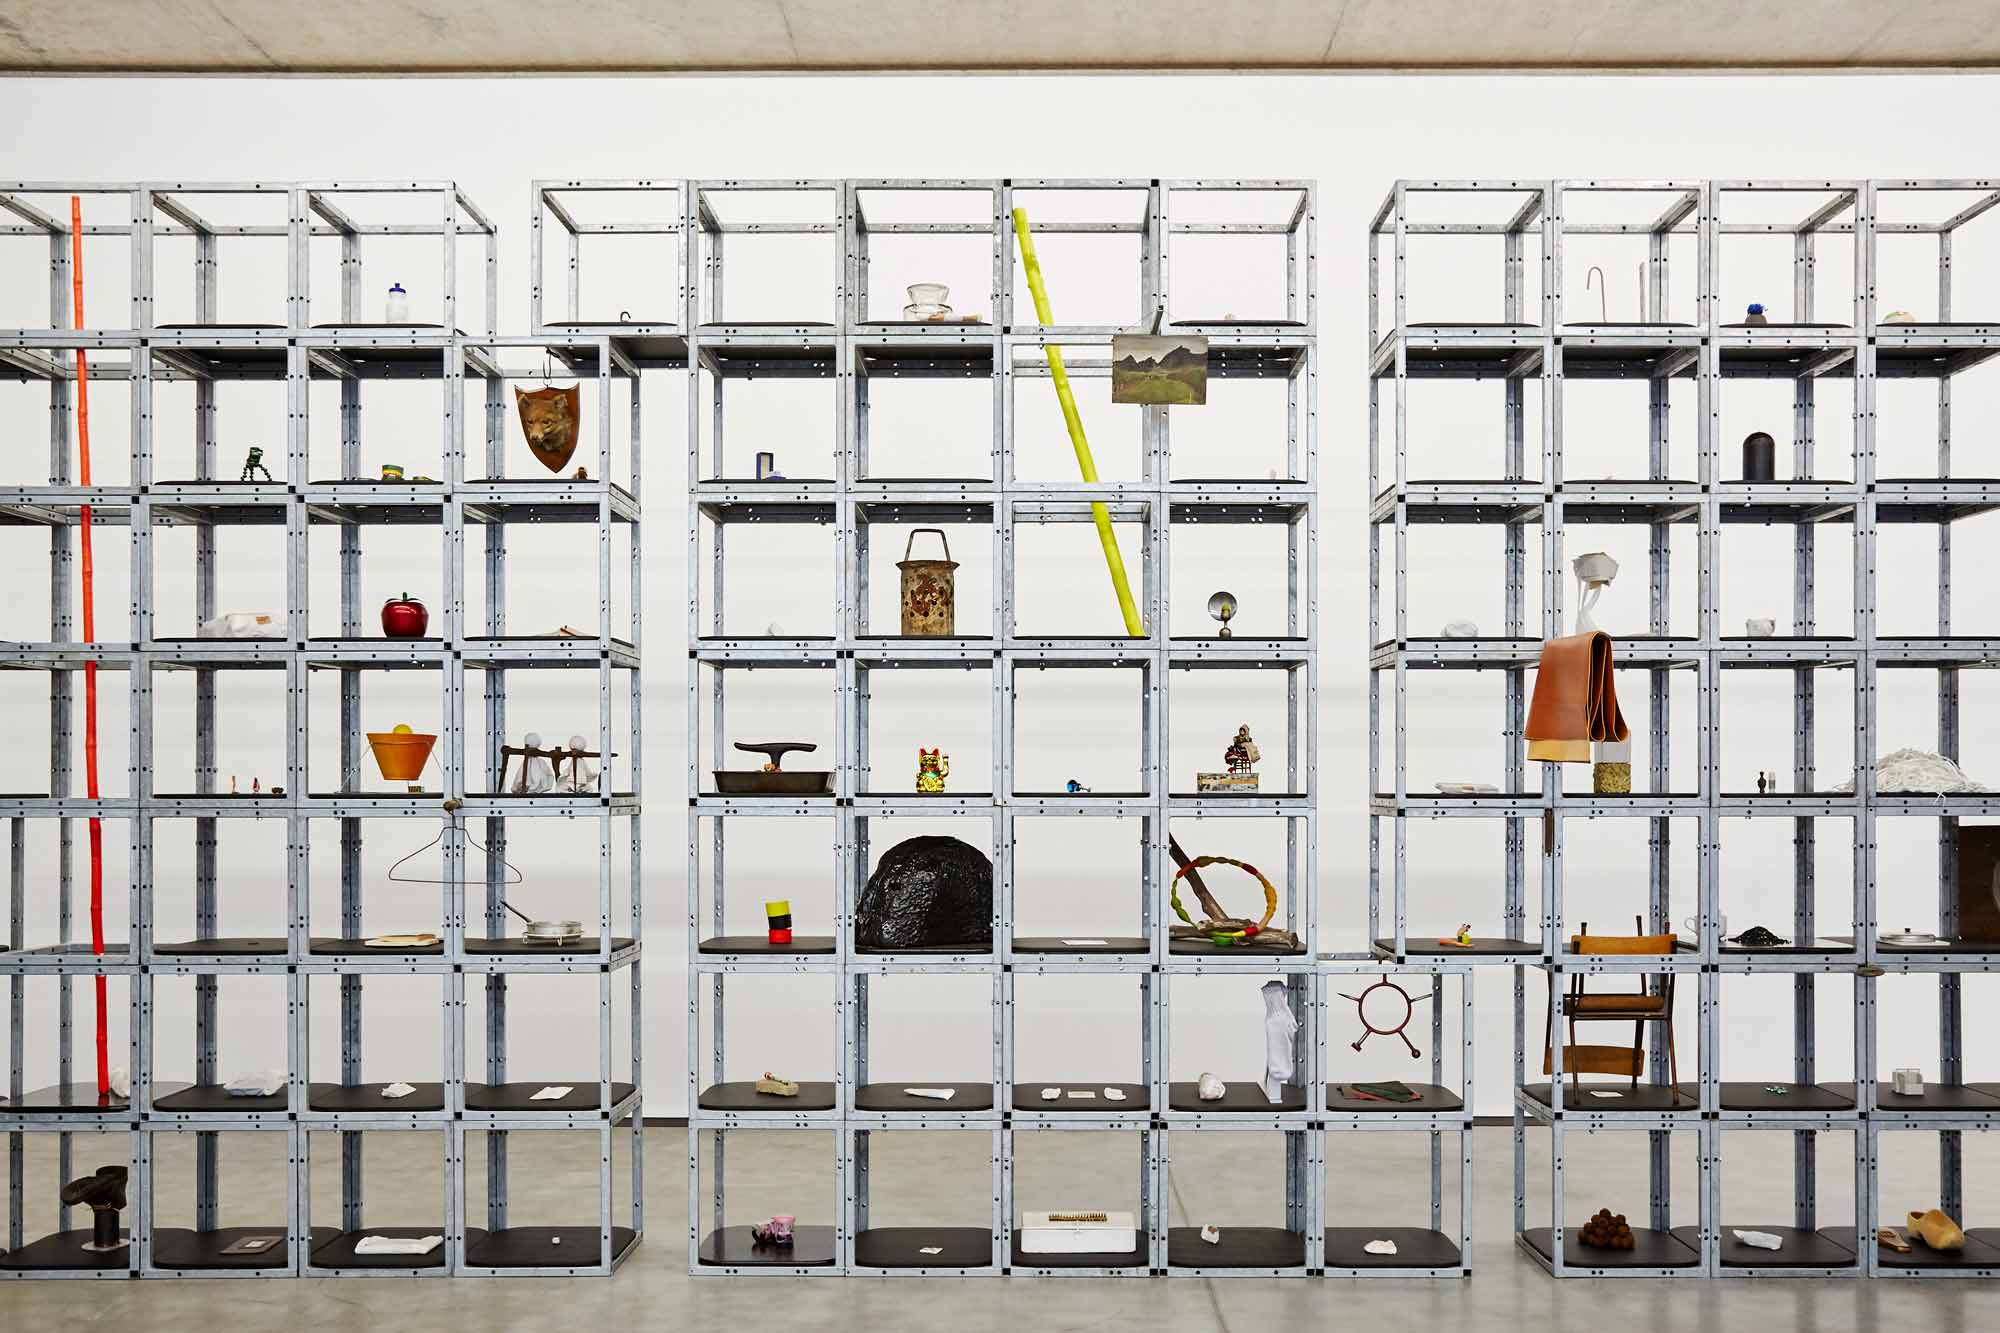 Keith Wilson's 'Calendar' exhibited at MAC - A metal structure of hollow cubes contains an assortment of items.